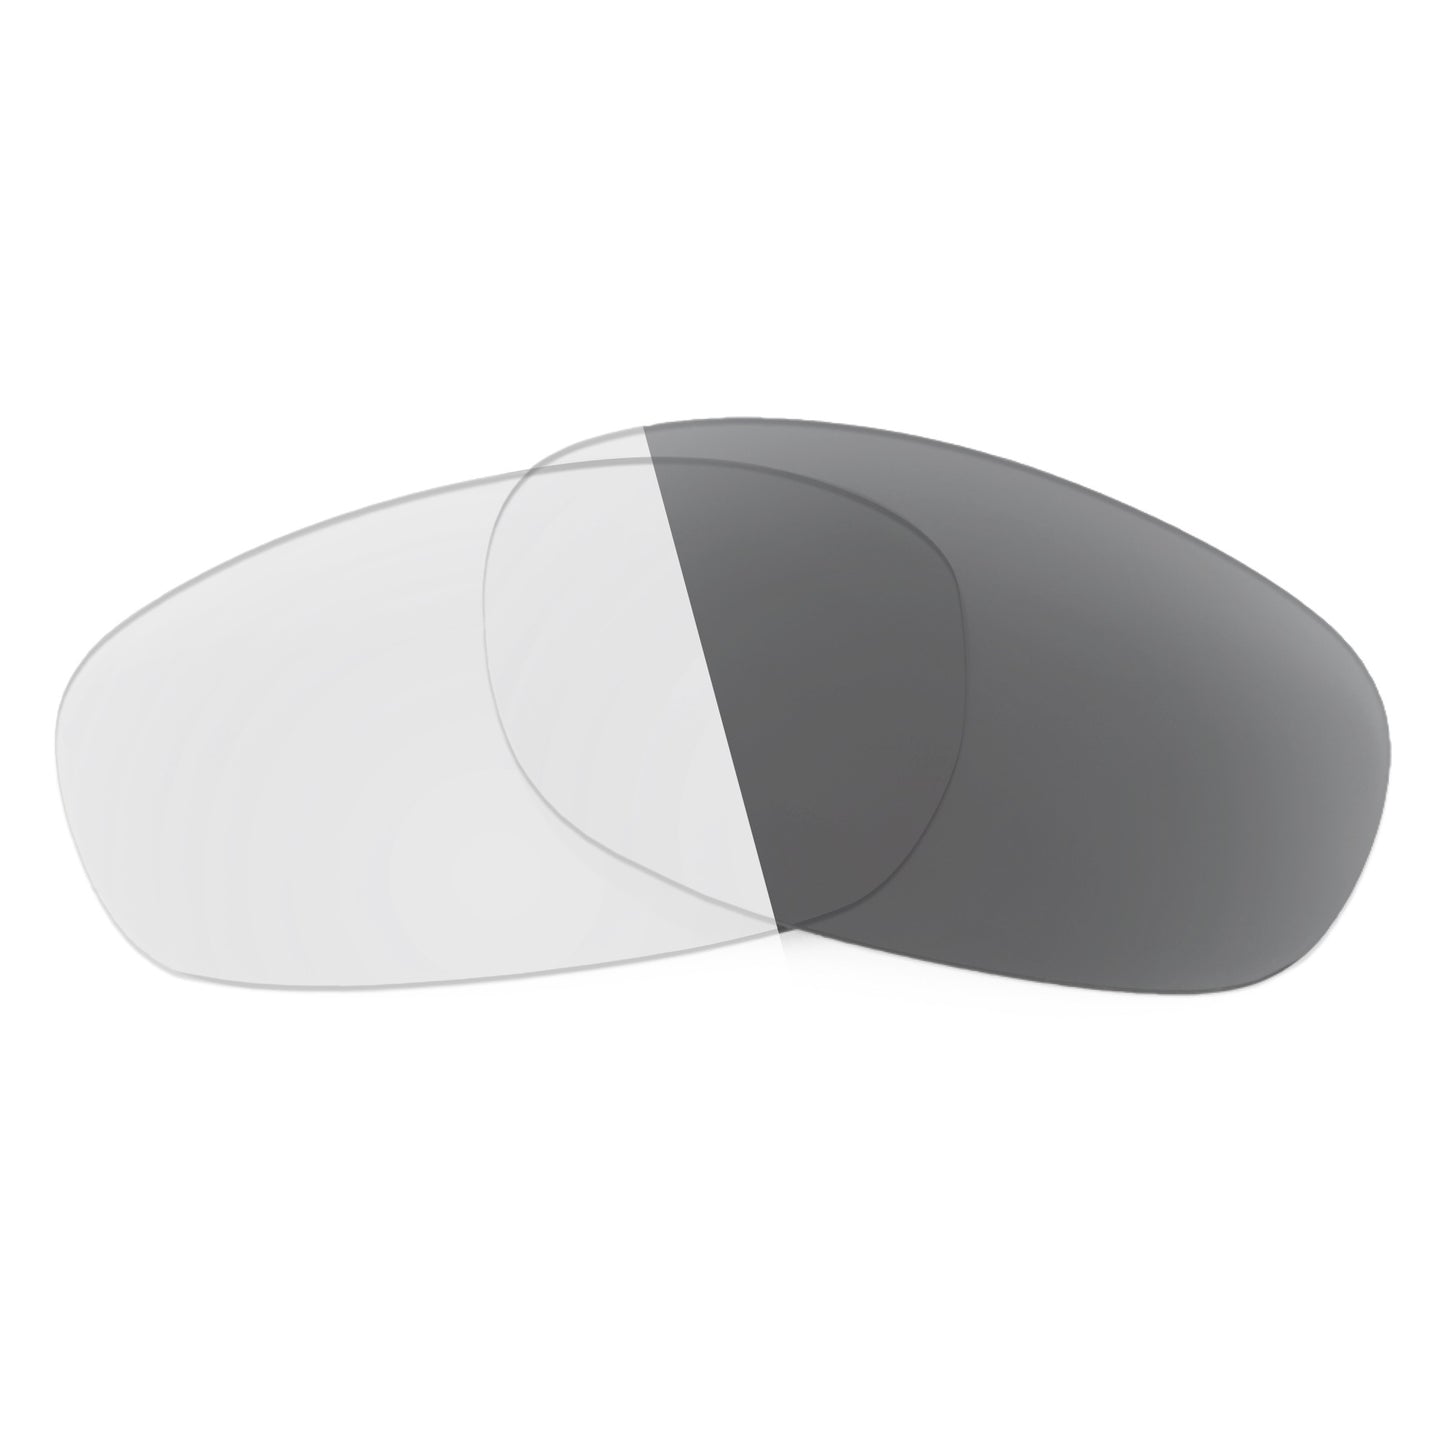 Revant replacement lenses for Ray-Ban Sleek RB3162 52mm Non-Polarized Adapt Gray Photochromic